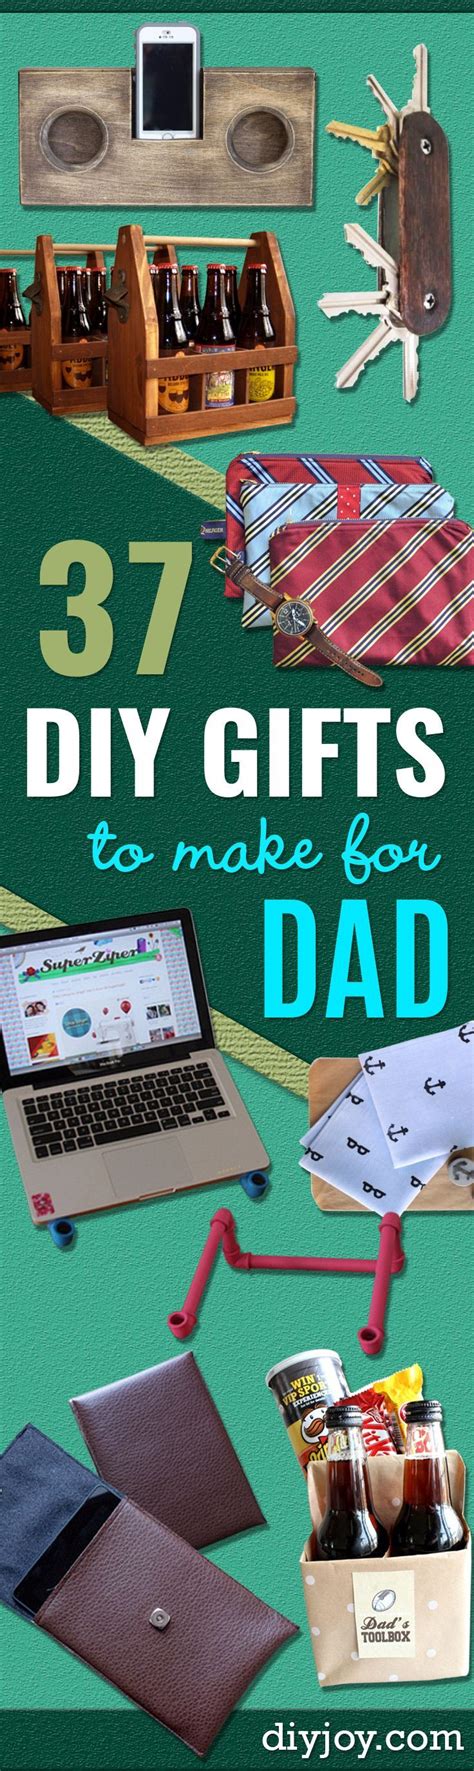 And dad will have a. 37 DIY Gifts to Make for Dad | Diy gifts to make, Diy ...